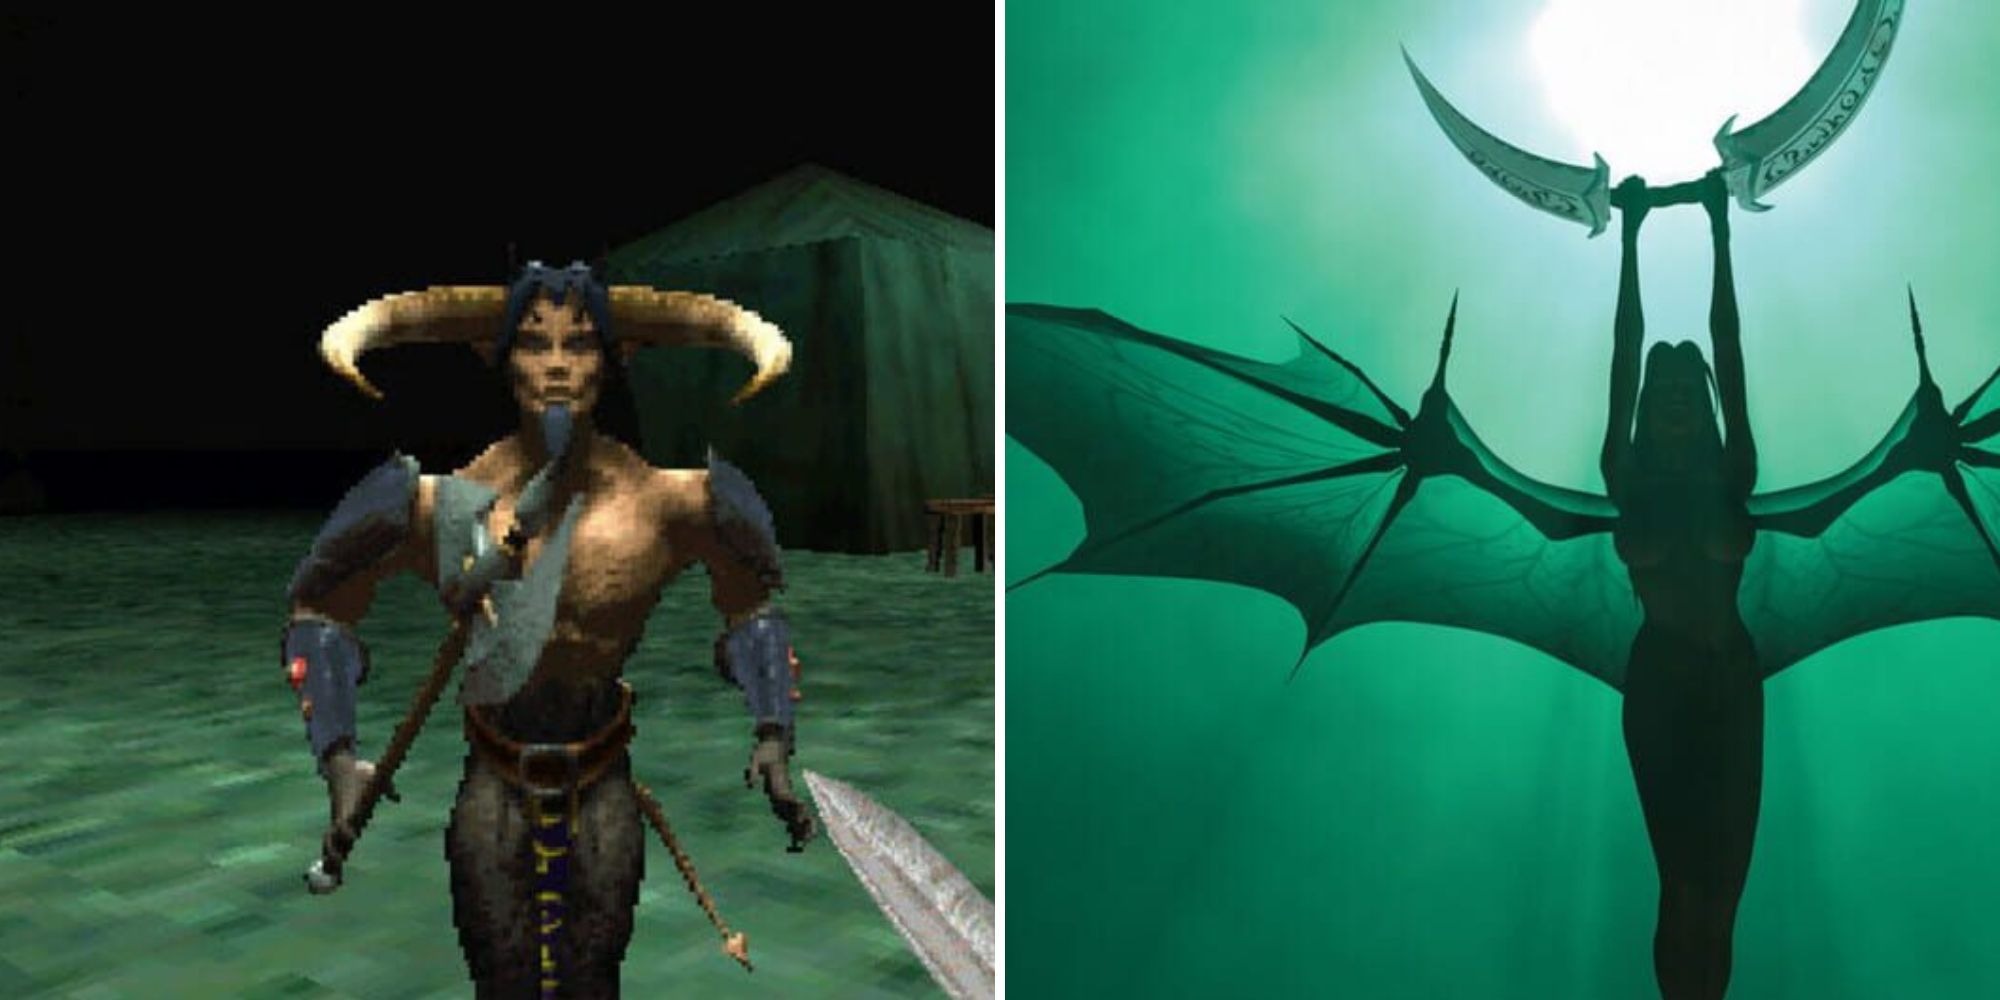 Left - Daedra Lord faces player, Right - Battlespire logo with statue of a Daedra Seducer holding Mehrunes Dagon's crest